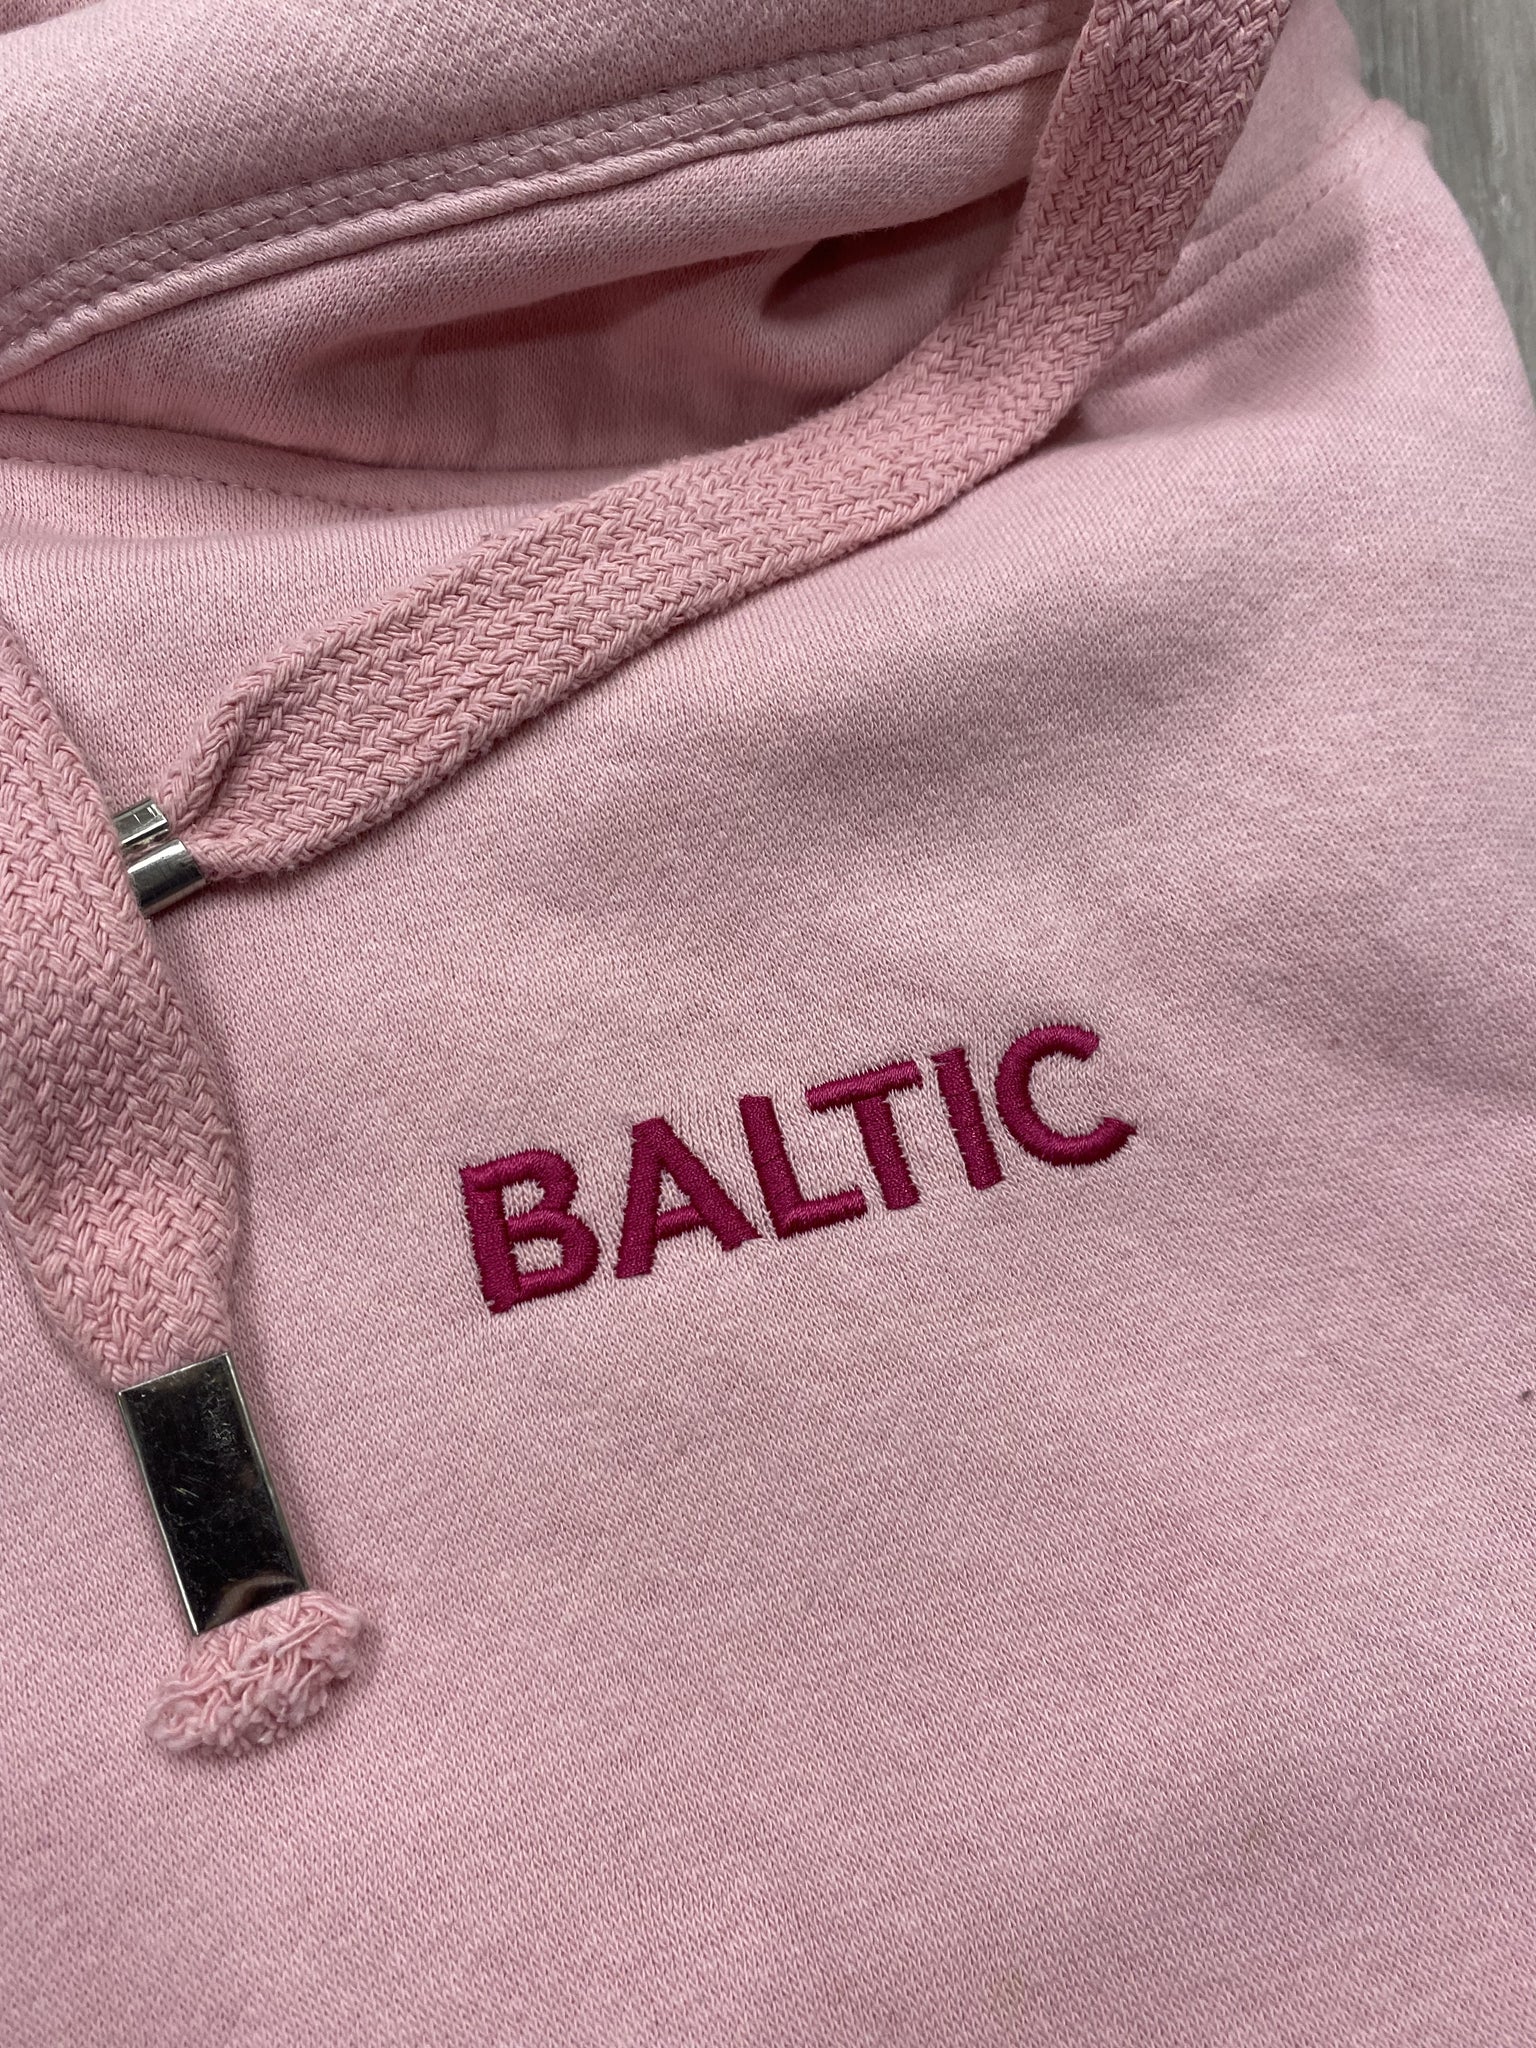 SAMPLE SALE Embroidered 'Baltic' Crossneck Hoodie, Baby Pink with Hot Pink Stitching